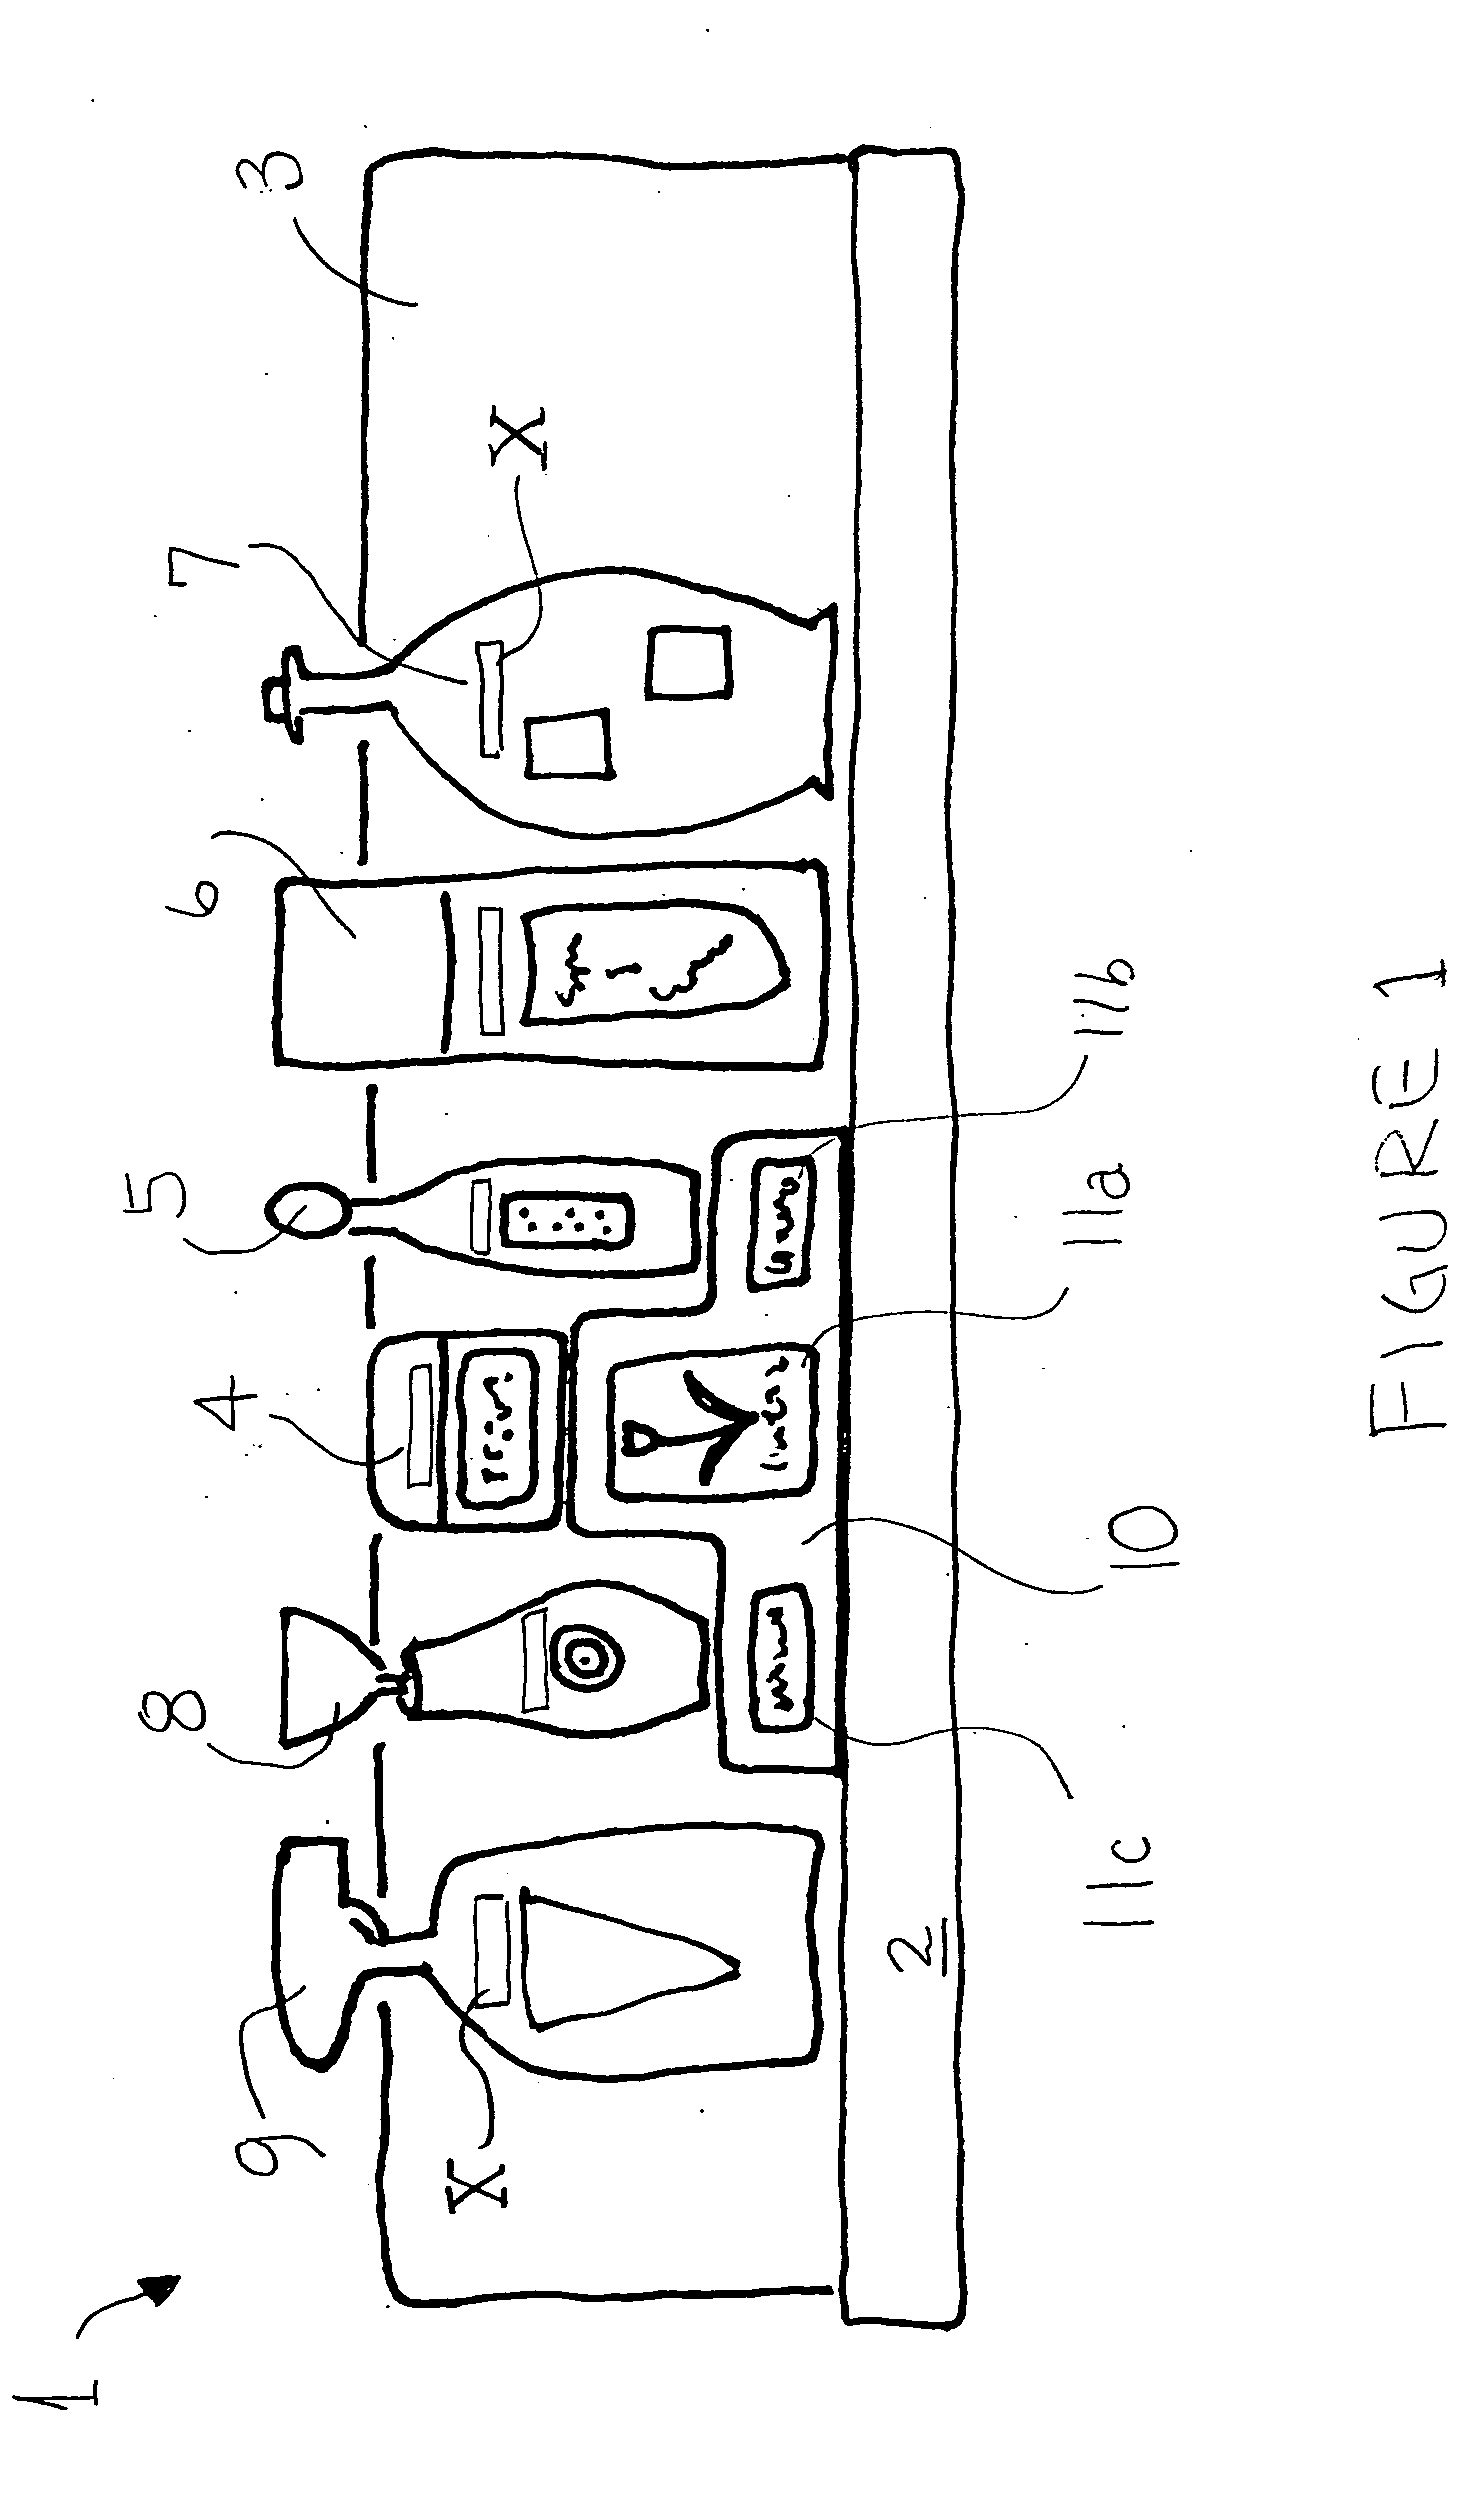 Retail display product combination and methods